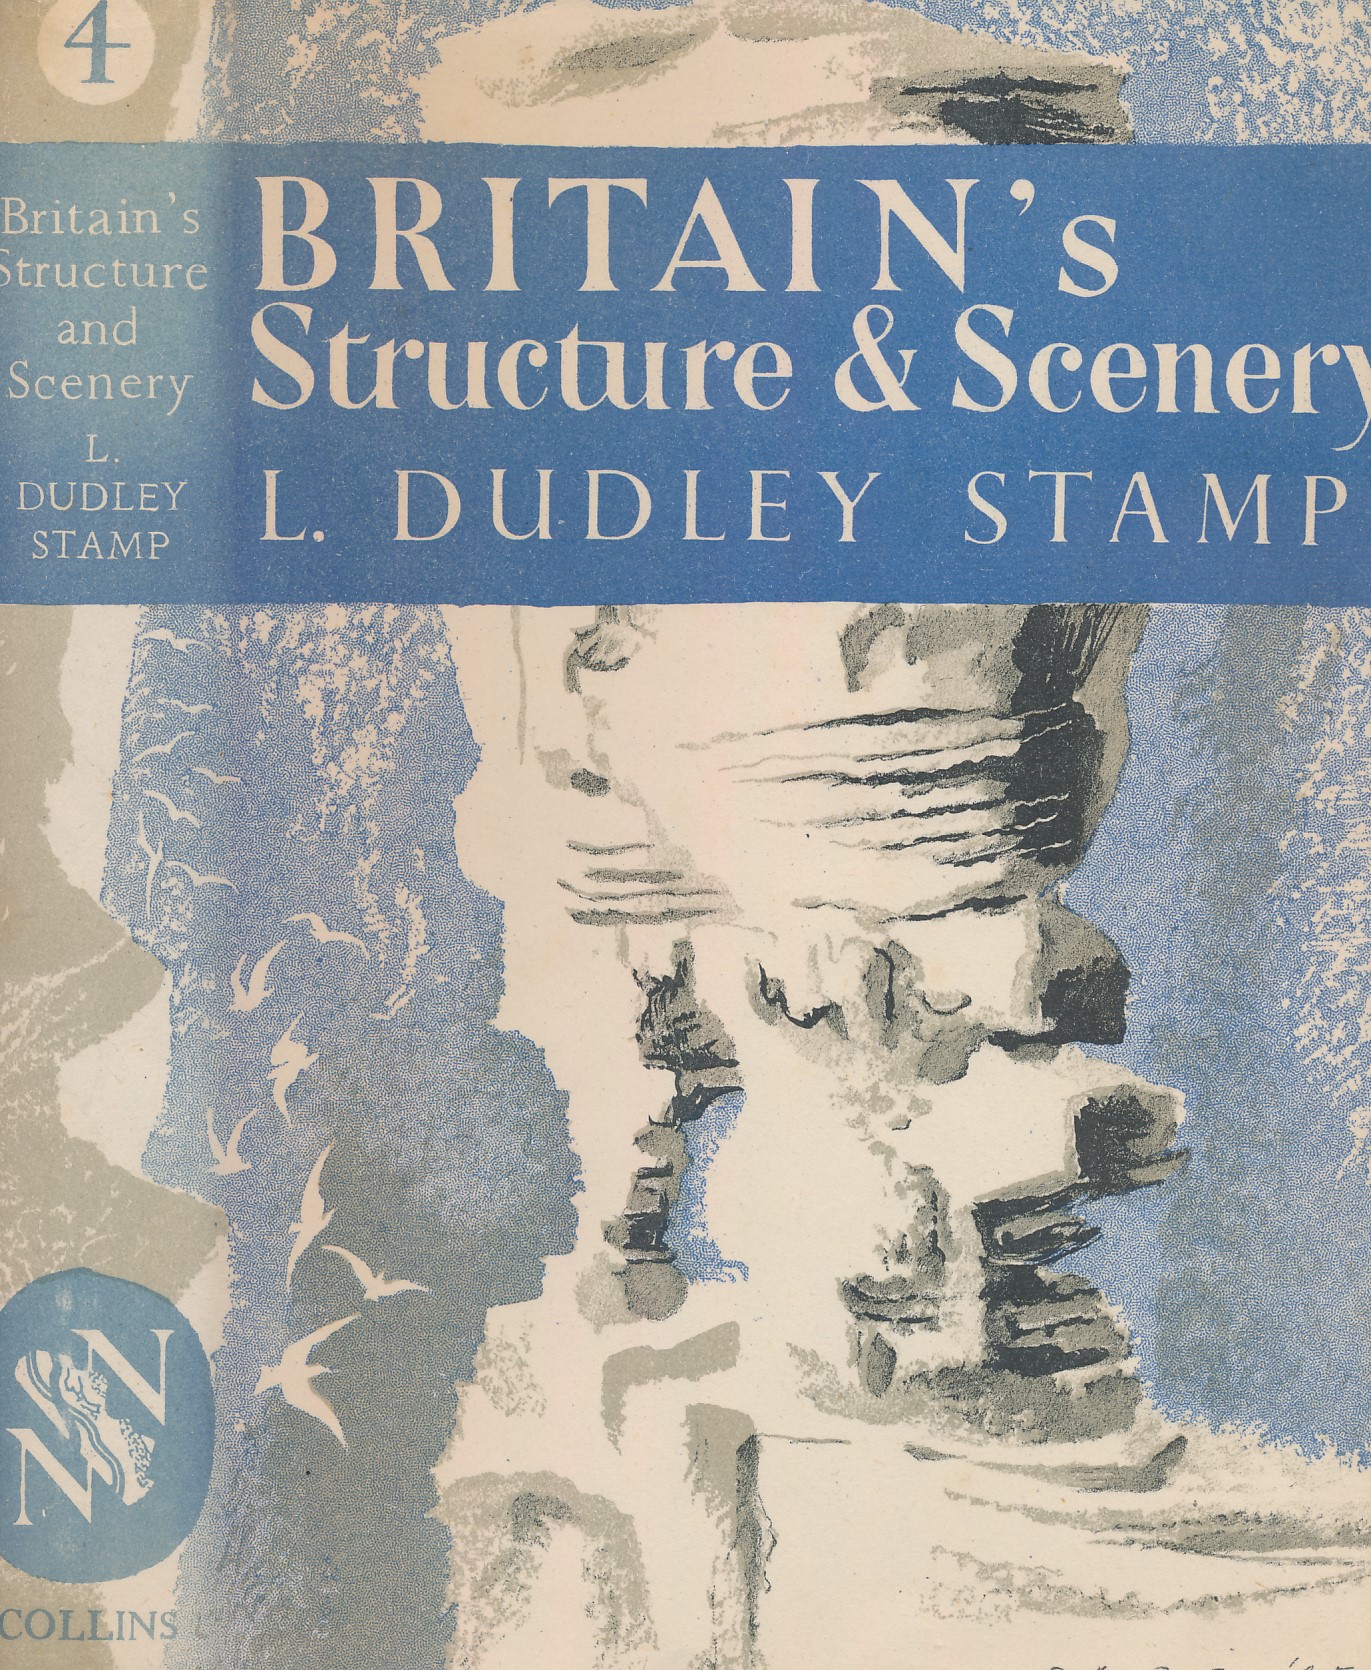 Britain's Structure and Scenery. New Naturalist No 4